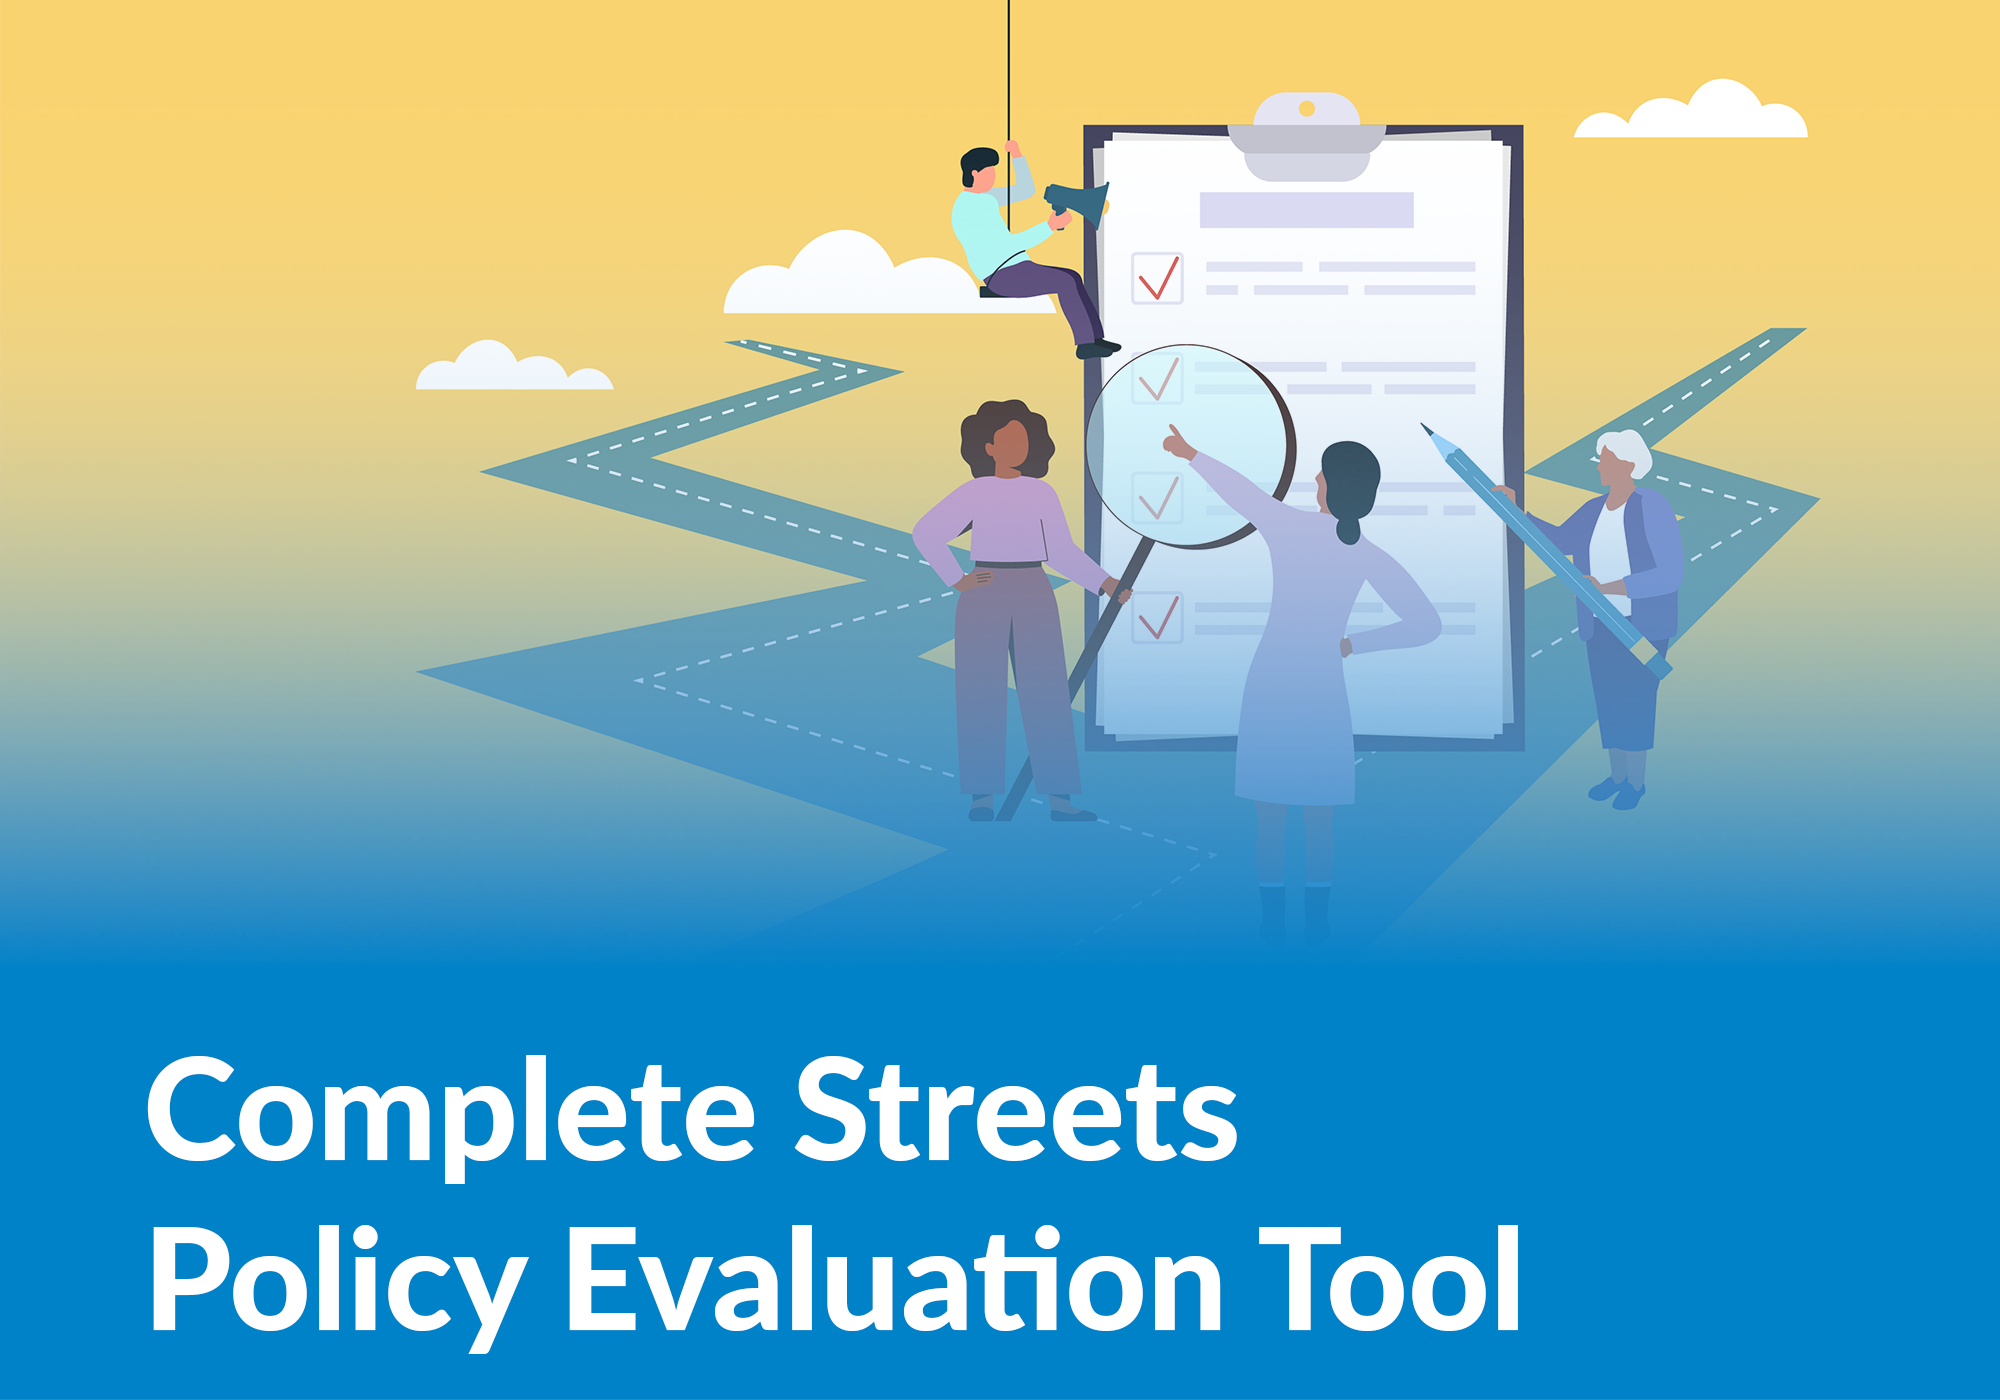 How strong is your Complete Streets policy? Use our Policy Evaluation tool to find out